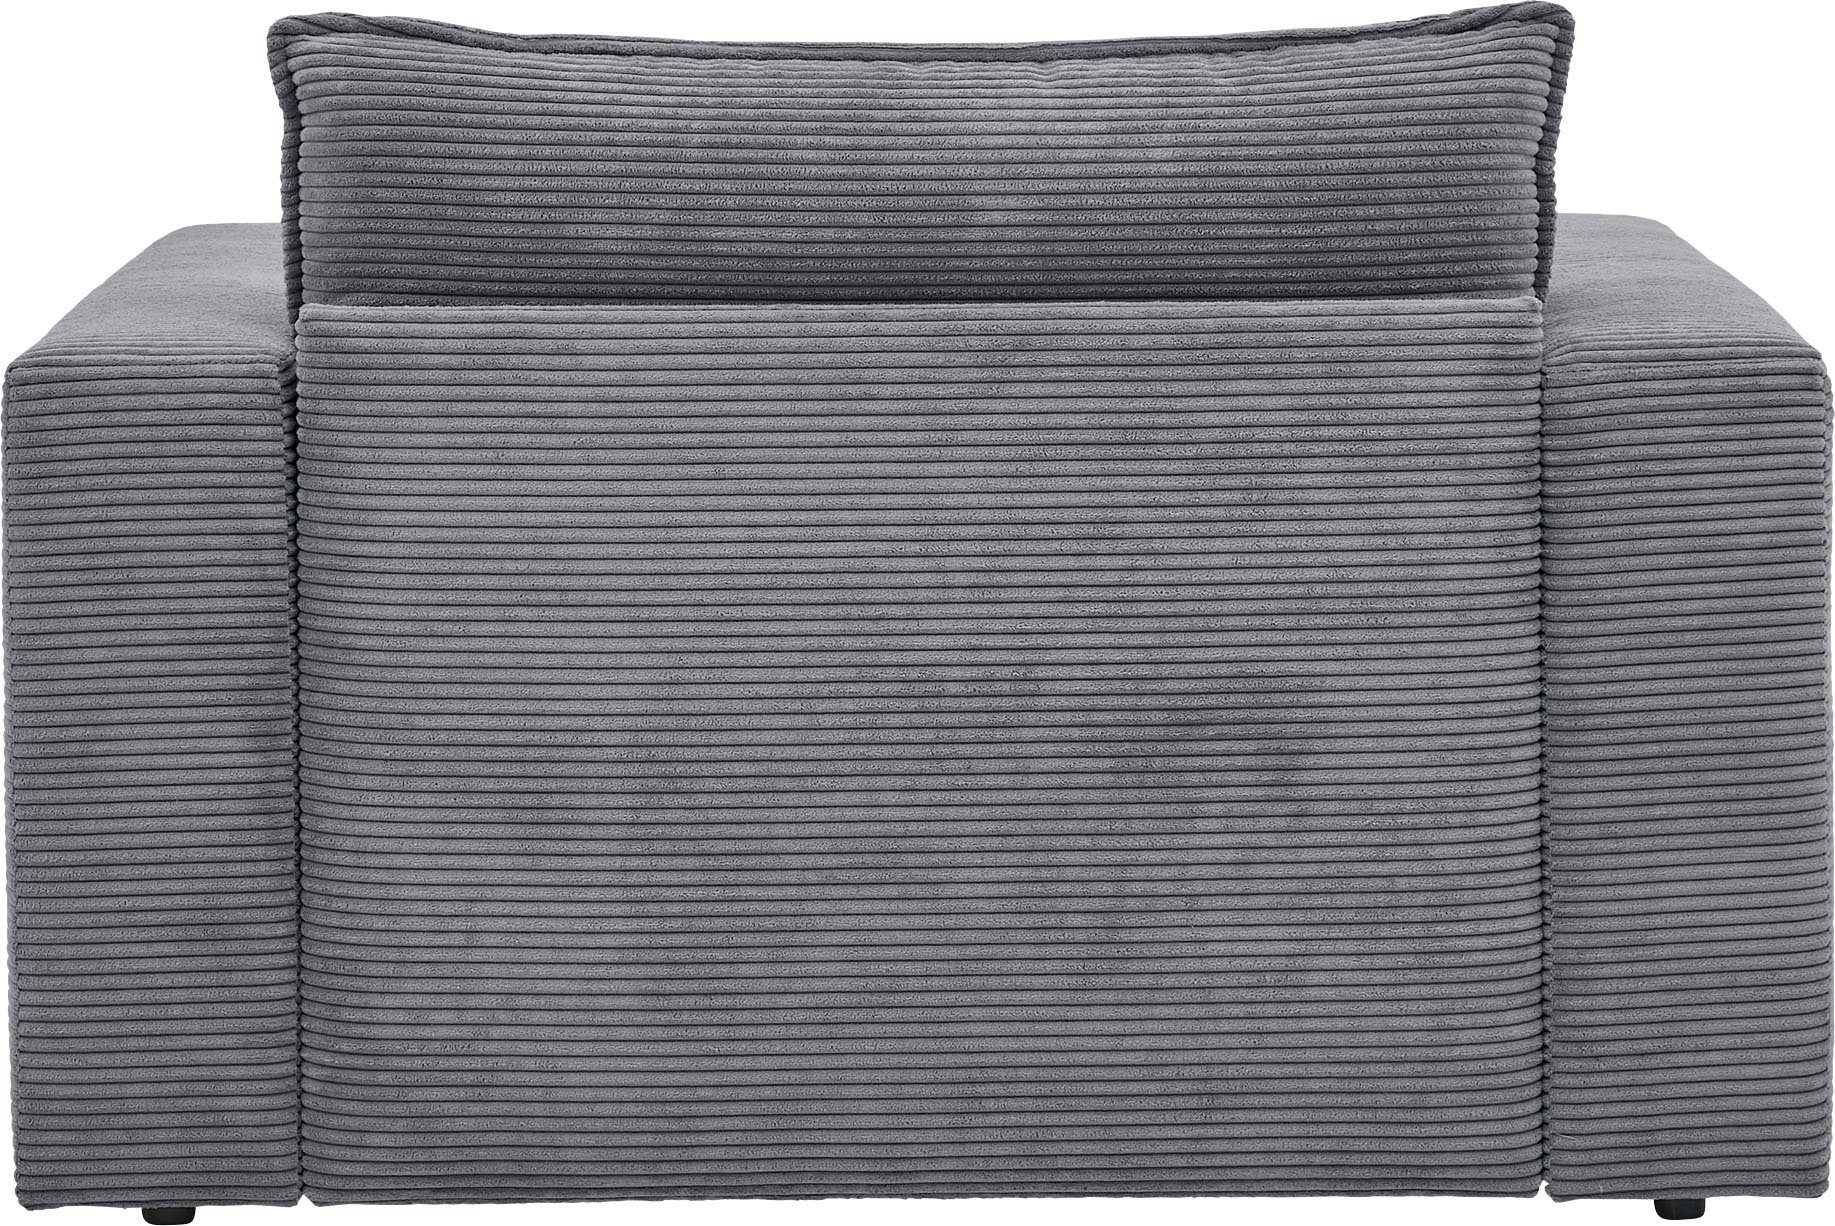 Loveseat Loveseat Cord, PIAGGE, Style Anthrazit Hochwertiger trendiger of Places